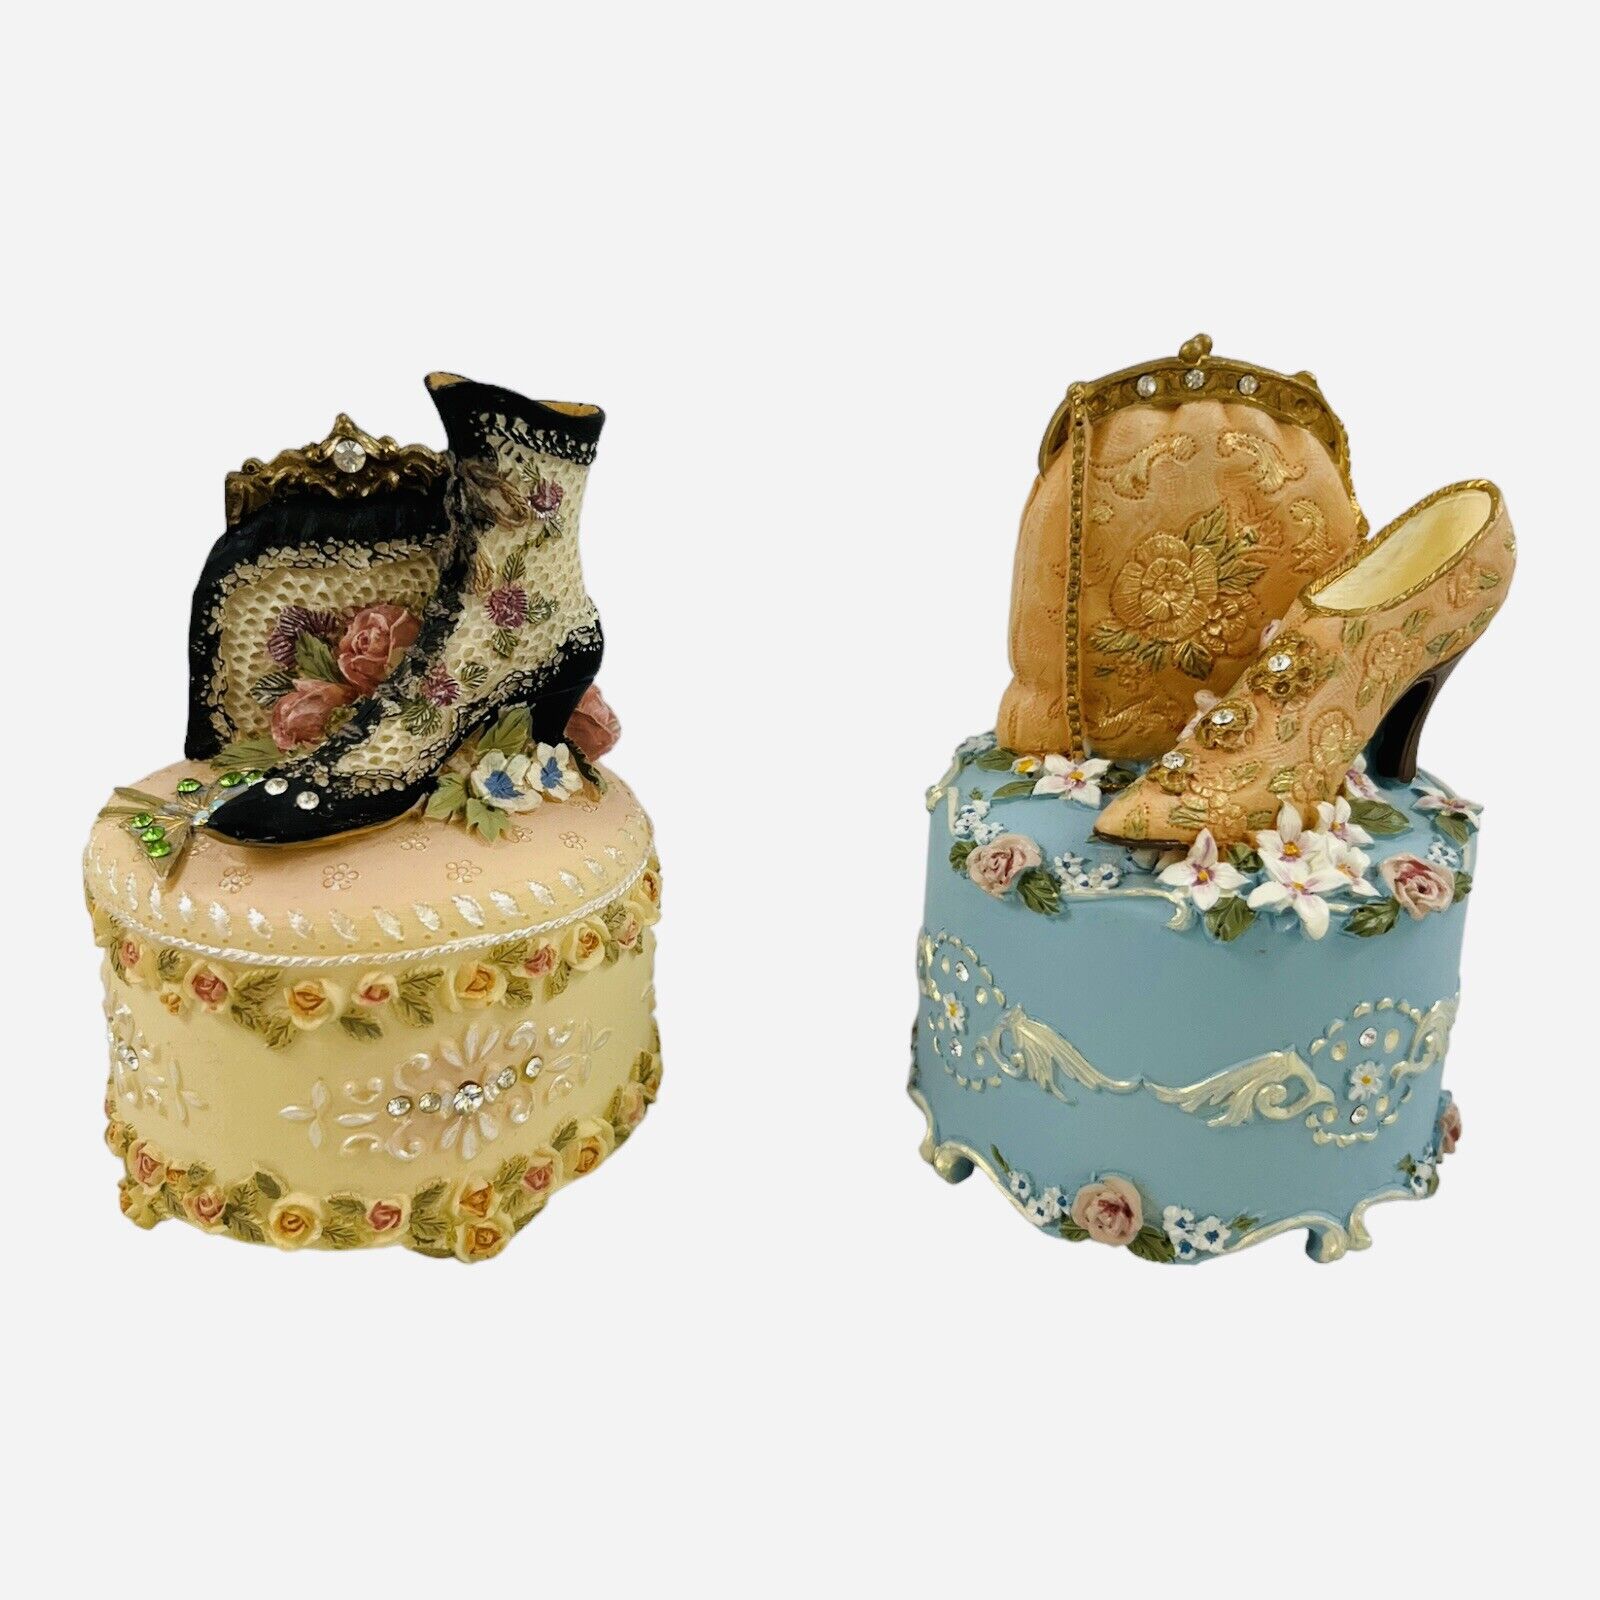 Antique Shoe Purse Cake Music Box Tea For Two Pink Blue Floral Rose Lot Set Of 2